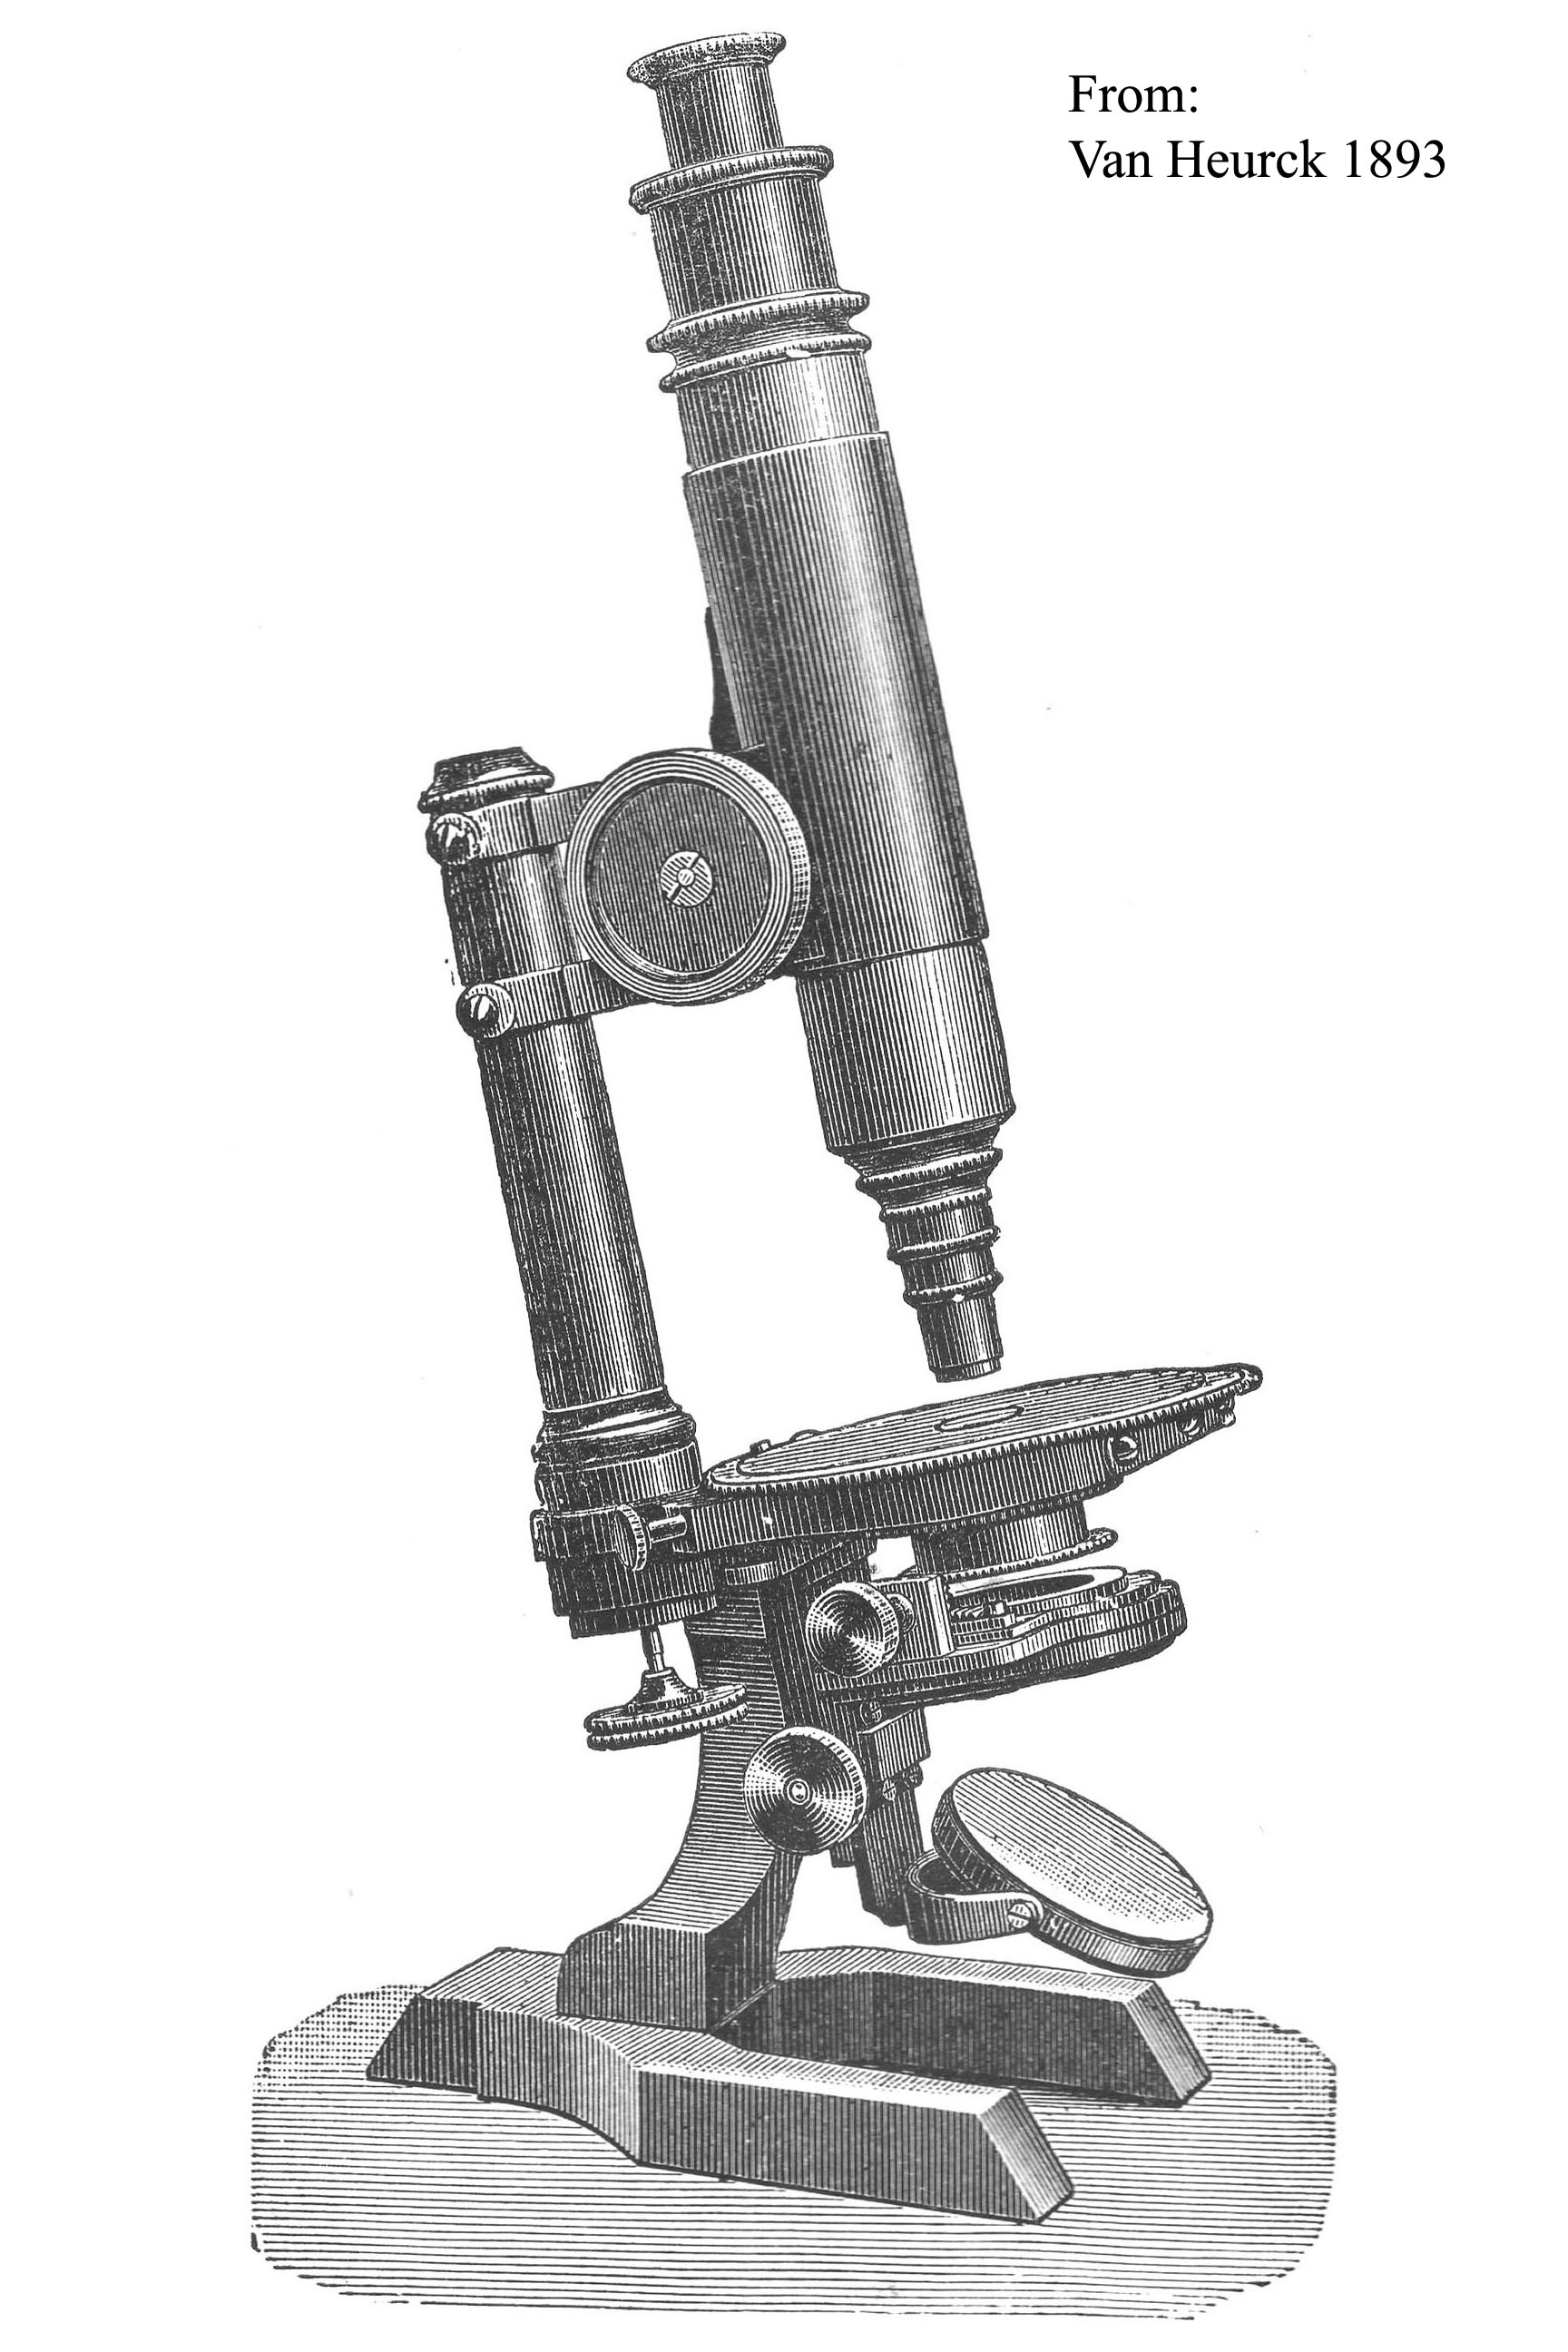 Seibert No 2 Microscope Engraving from Van Heurck, 
The Microscope about 1893